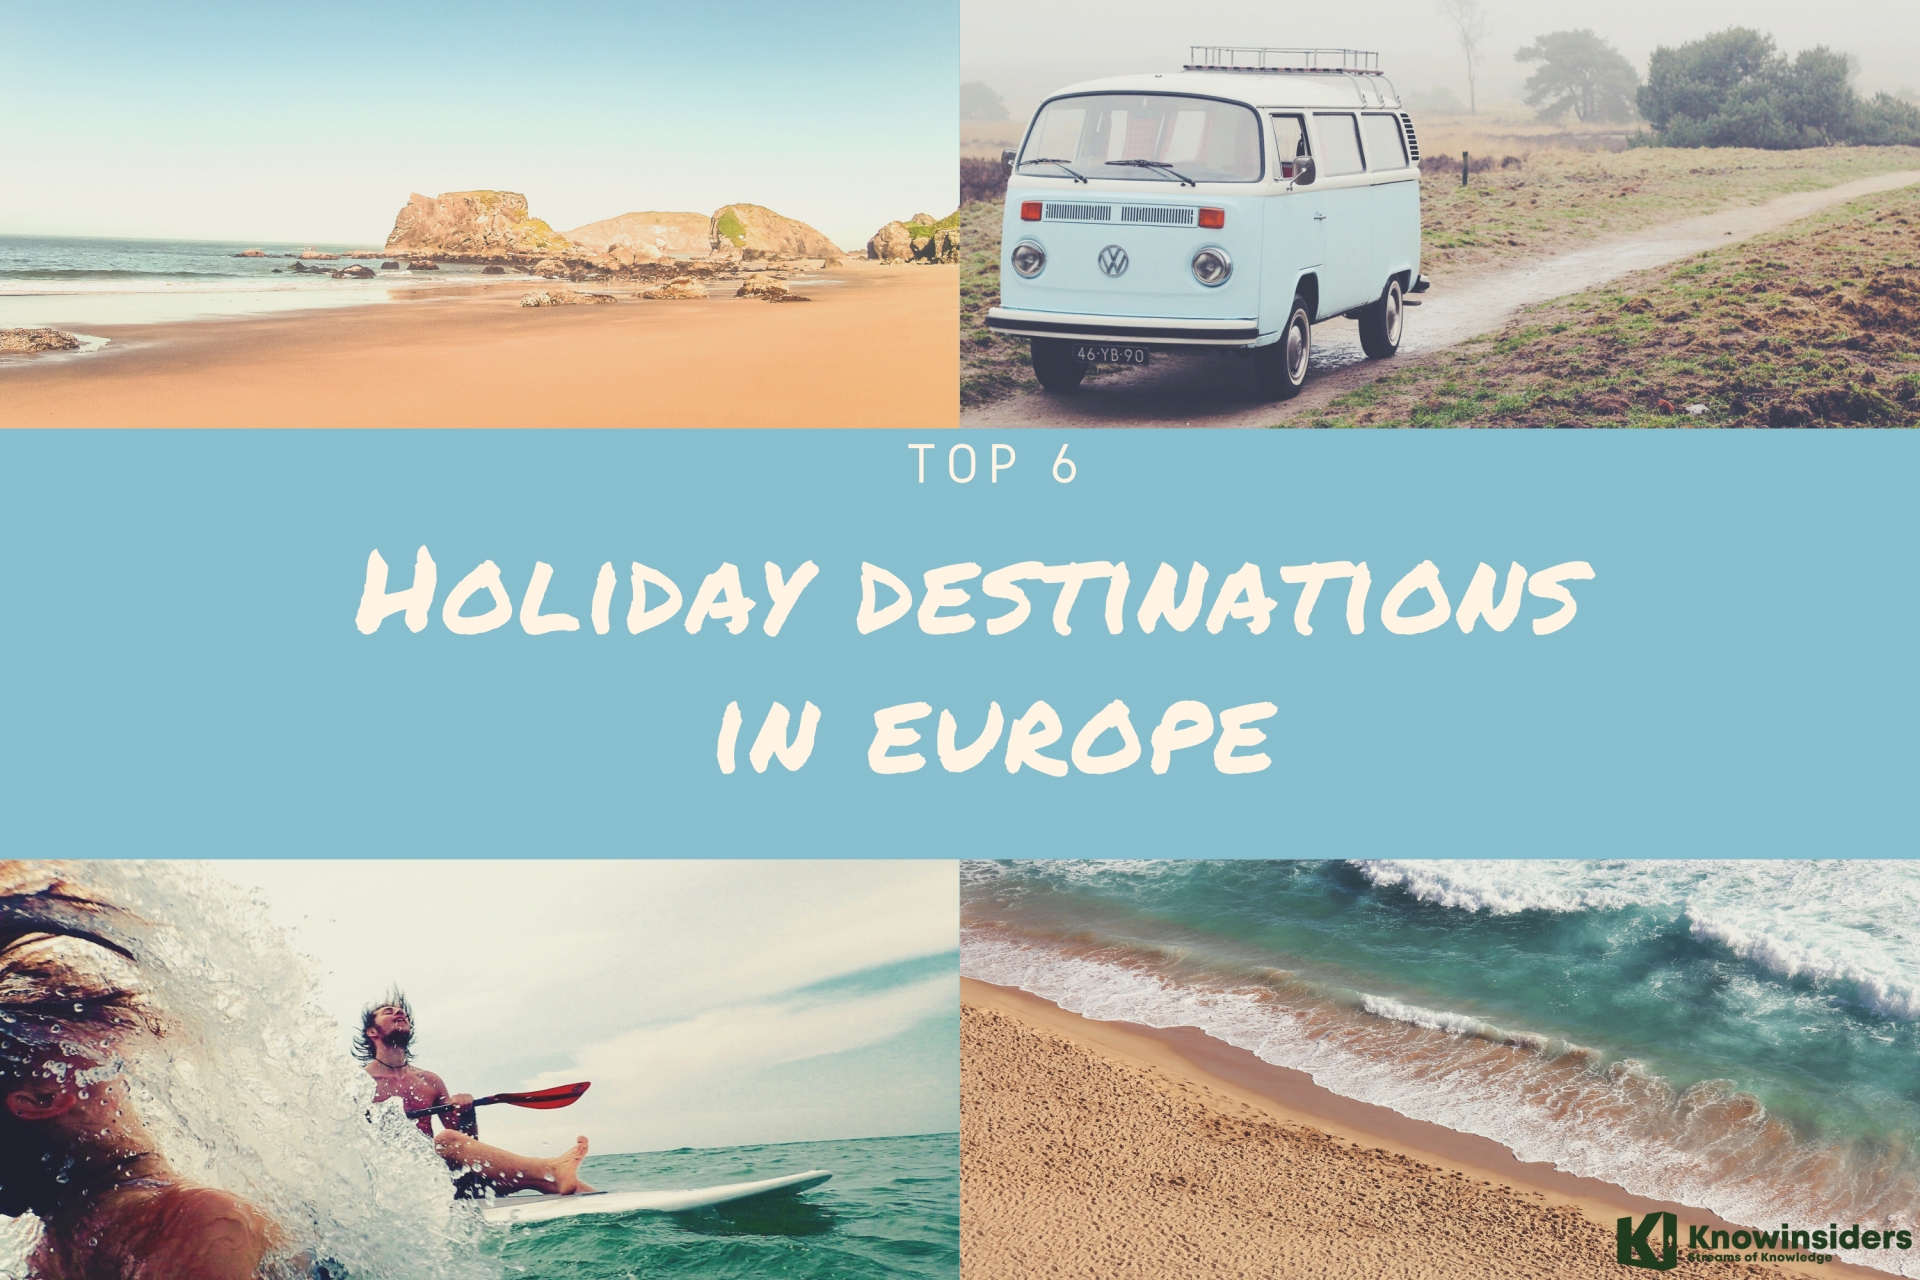 Top 6 Best Holiday Destinations In Europe by World Travel Awards